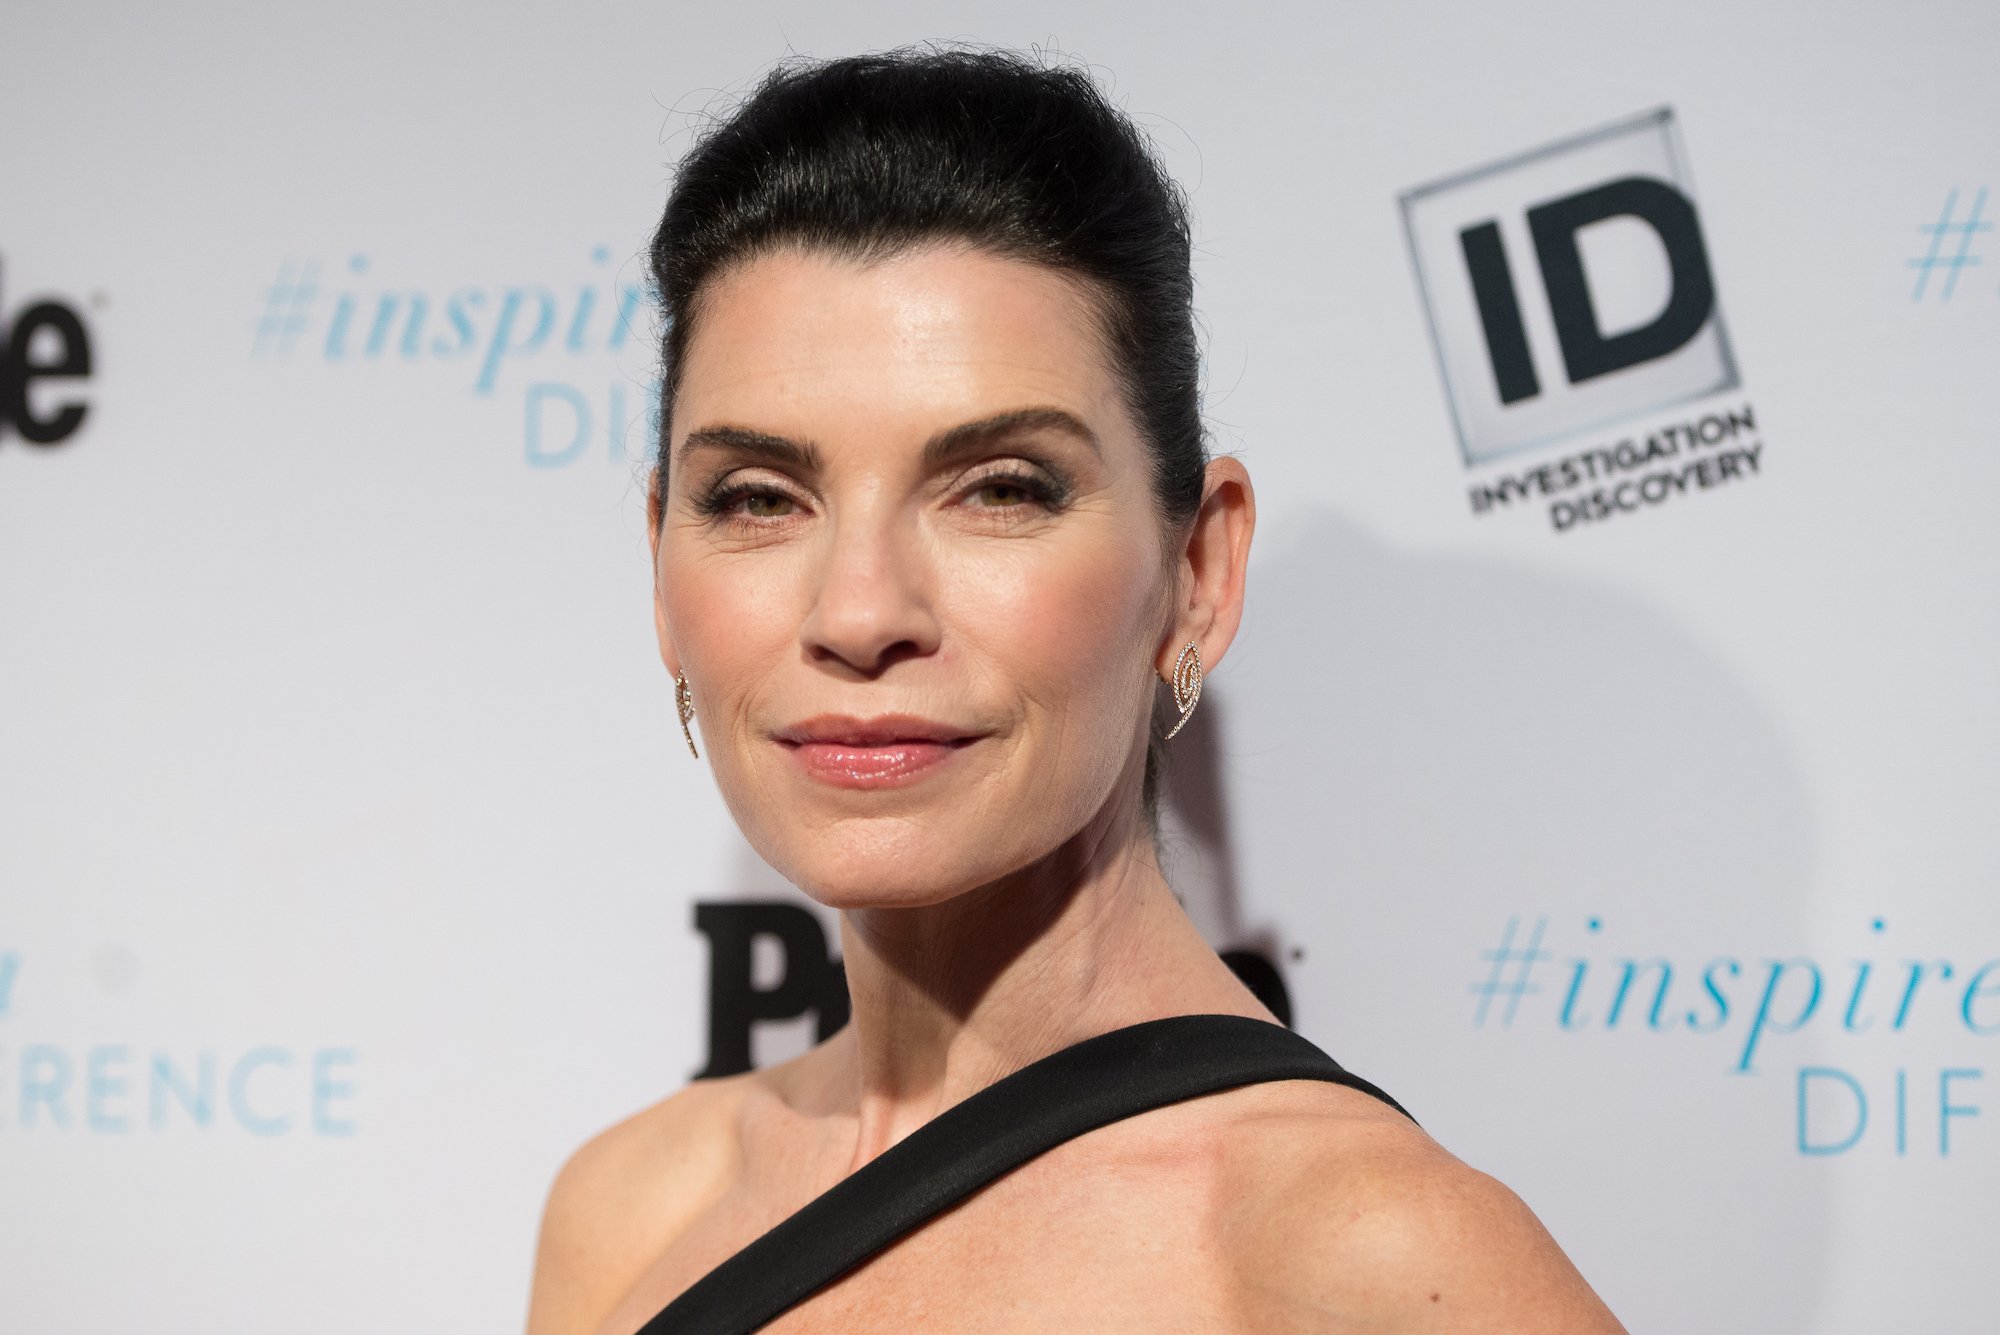 ‘The Good Wife’: Where Is Julianna Margulies Now?